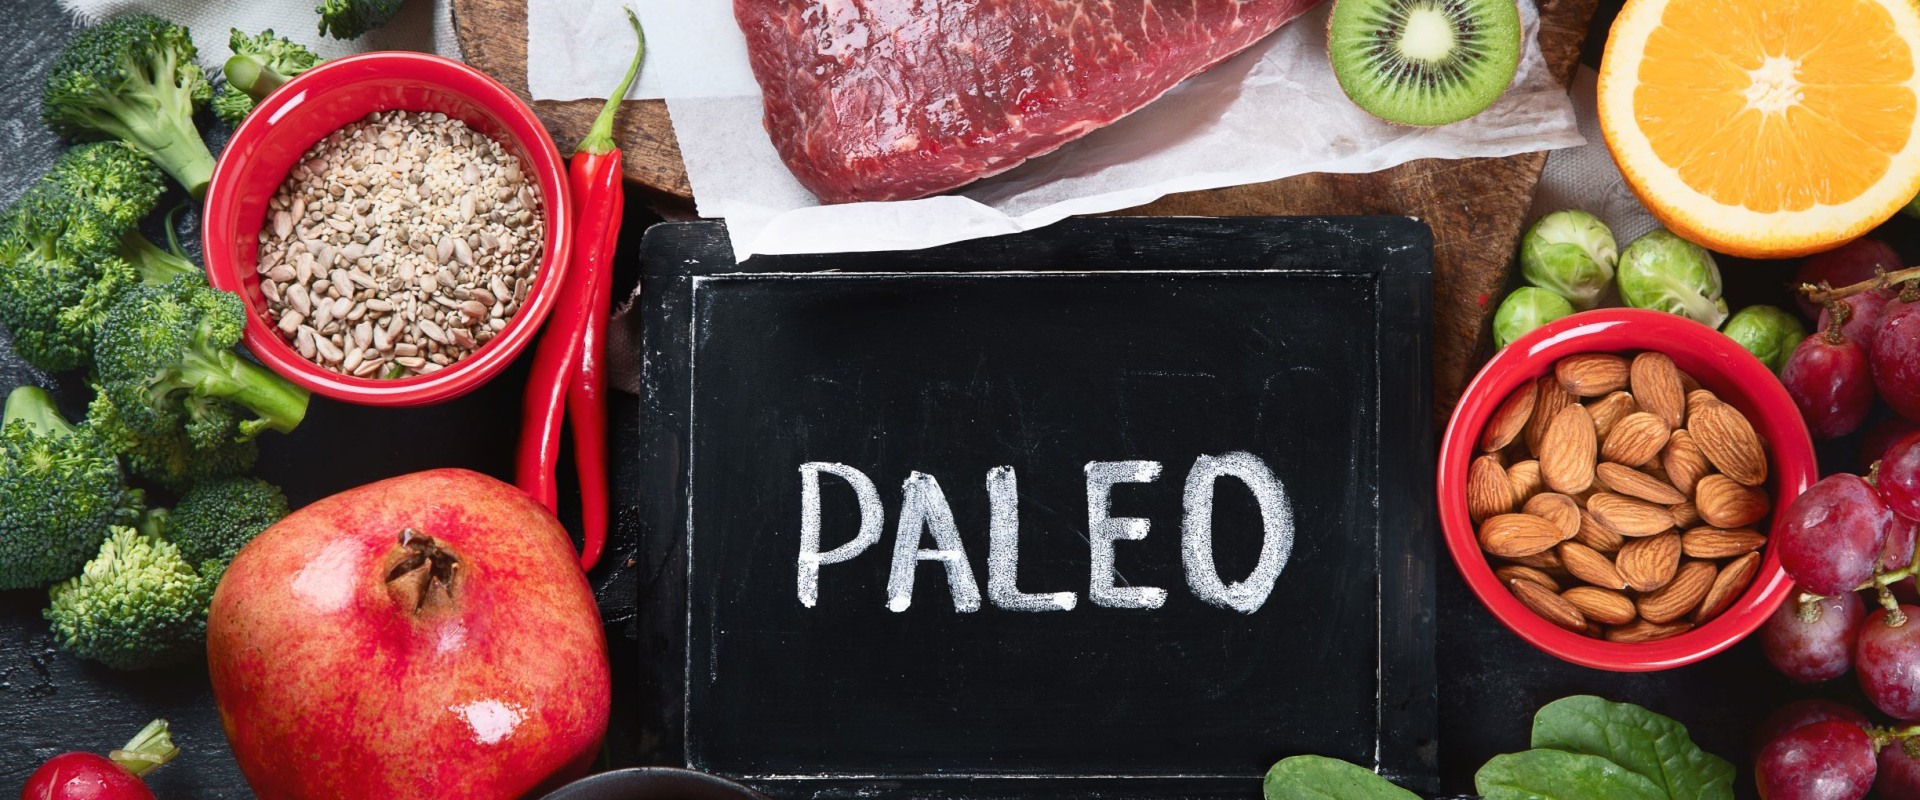 How can i make sure i'm getting enough nutrients while on a paleo diet?